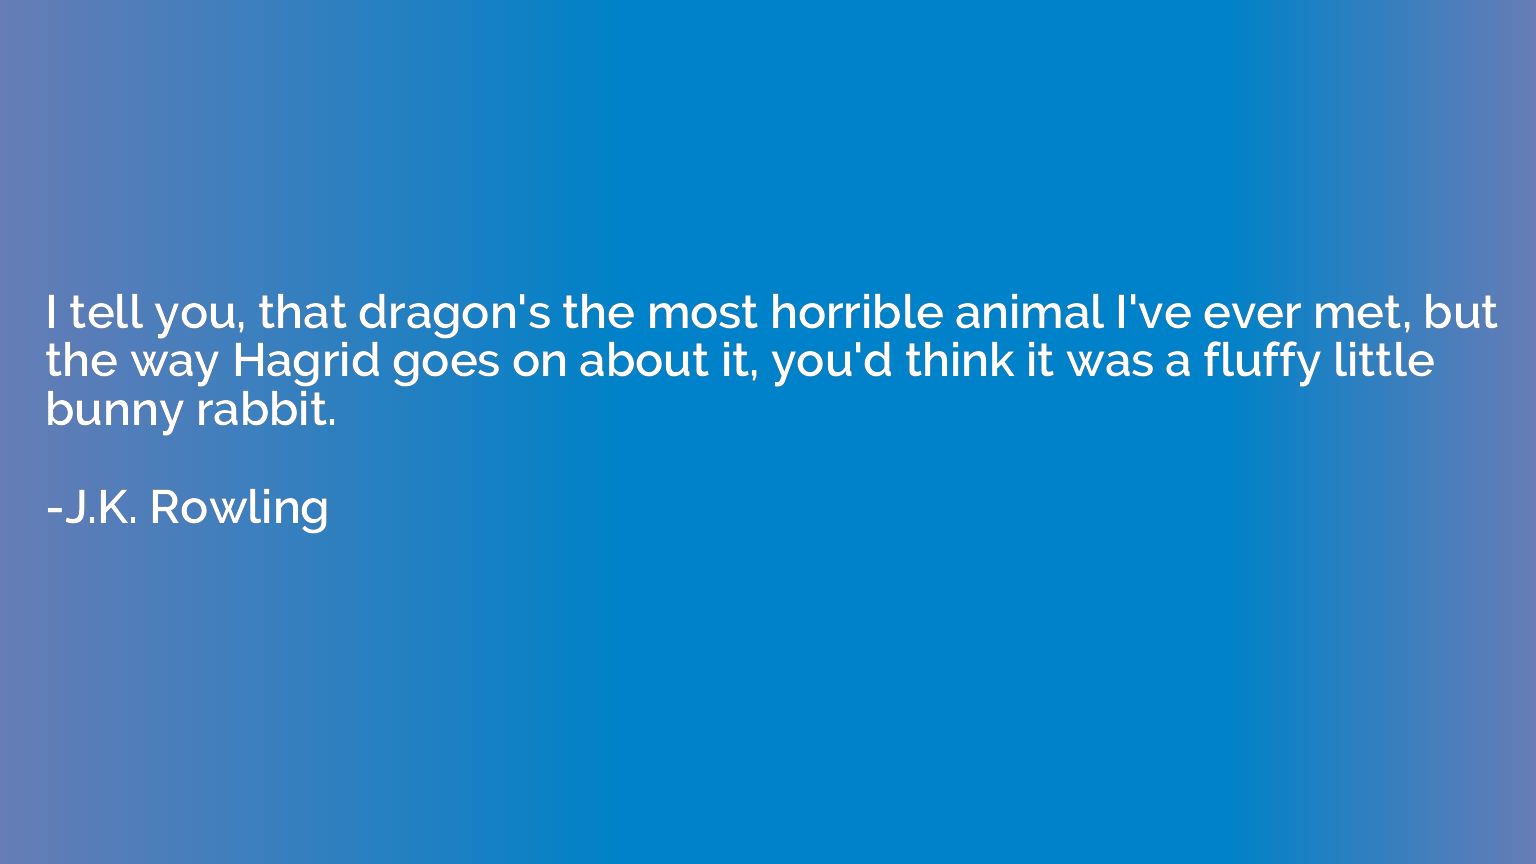 I tell you, that dragon's the most horrible animal I've ever